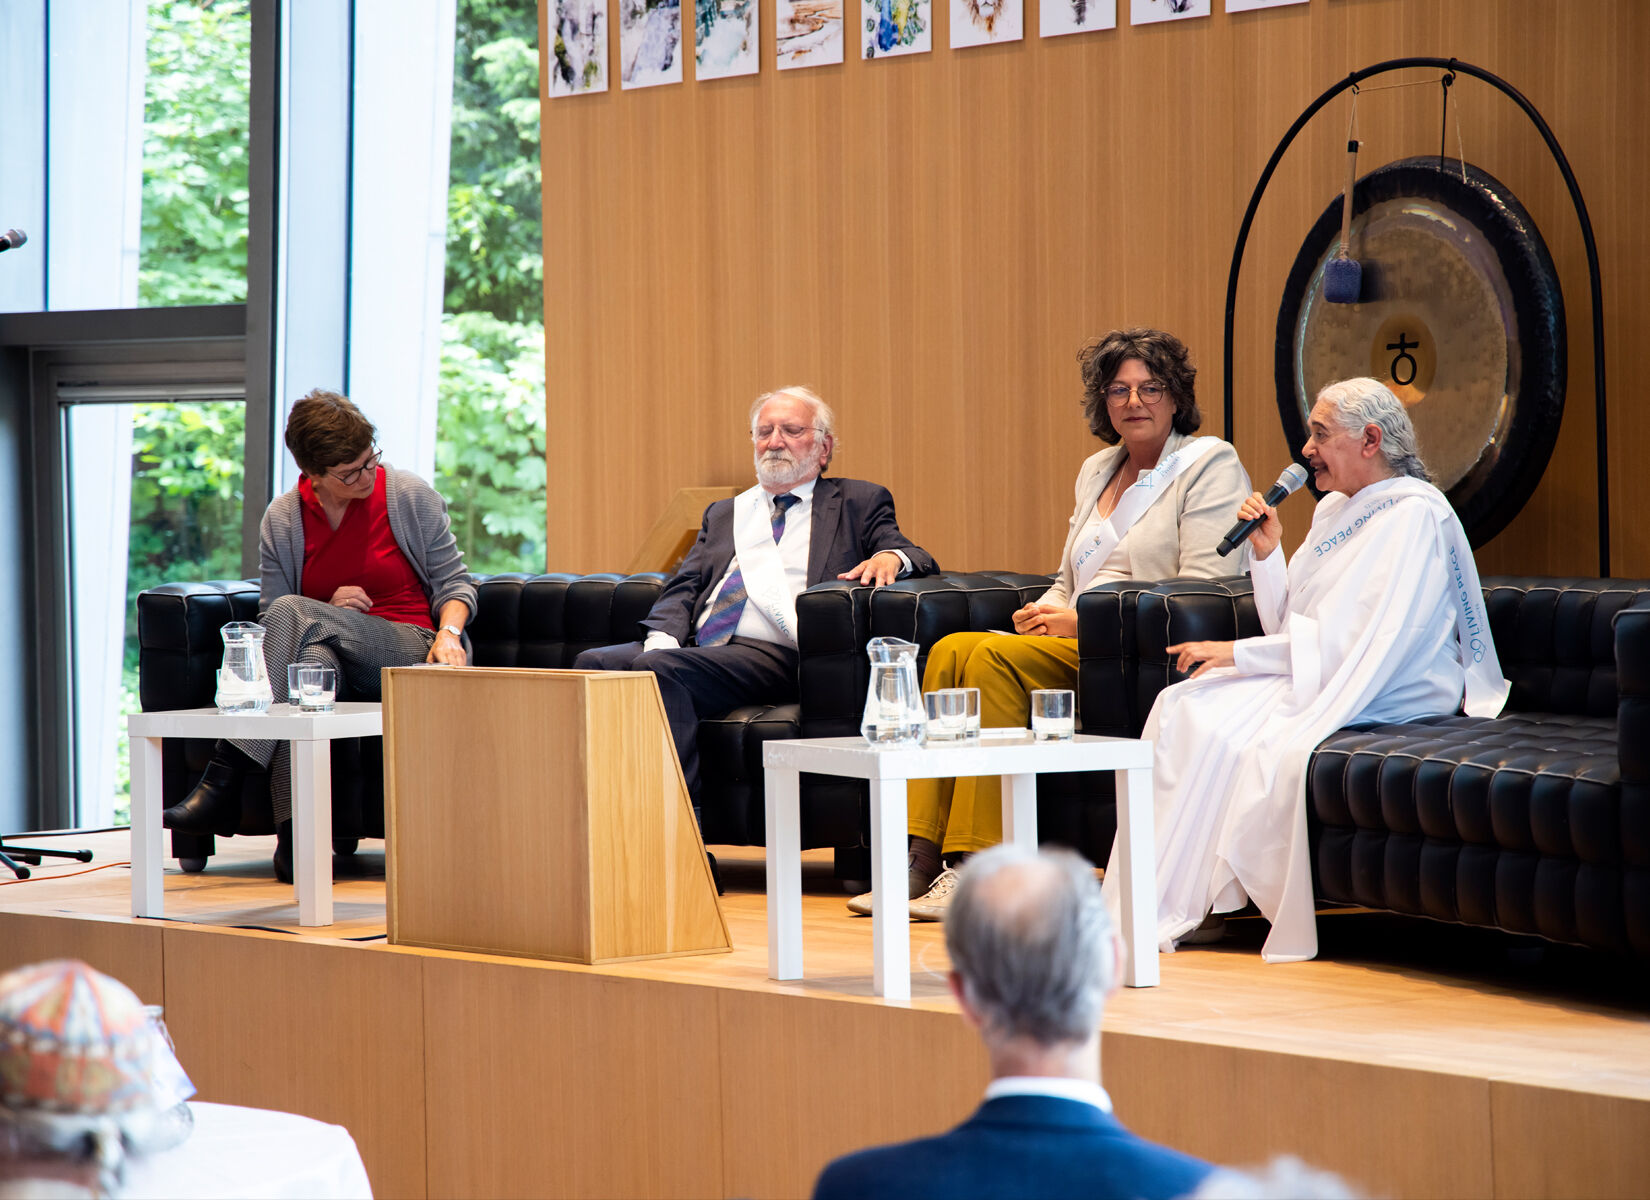 Water for All conference, International Peace Palace, The Hague, 2021